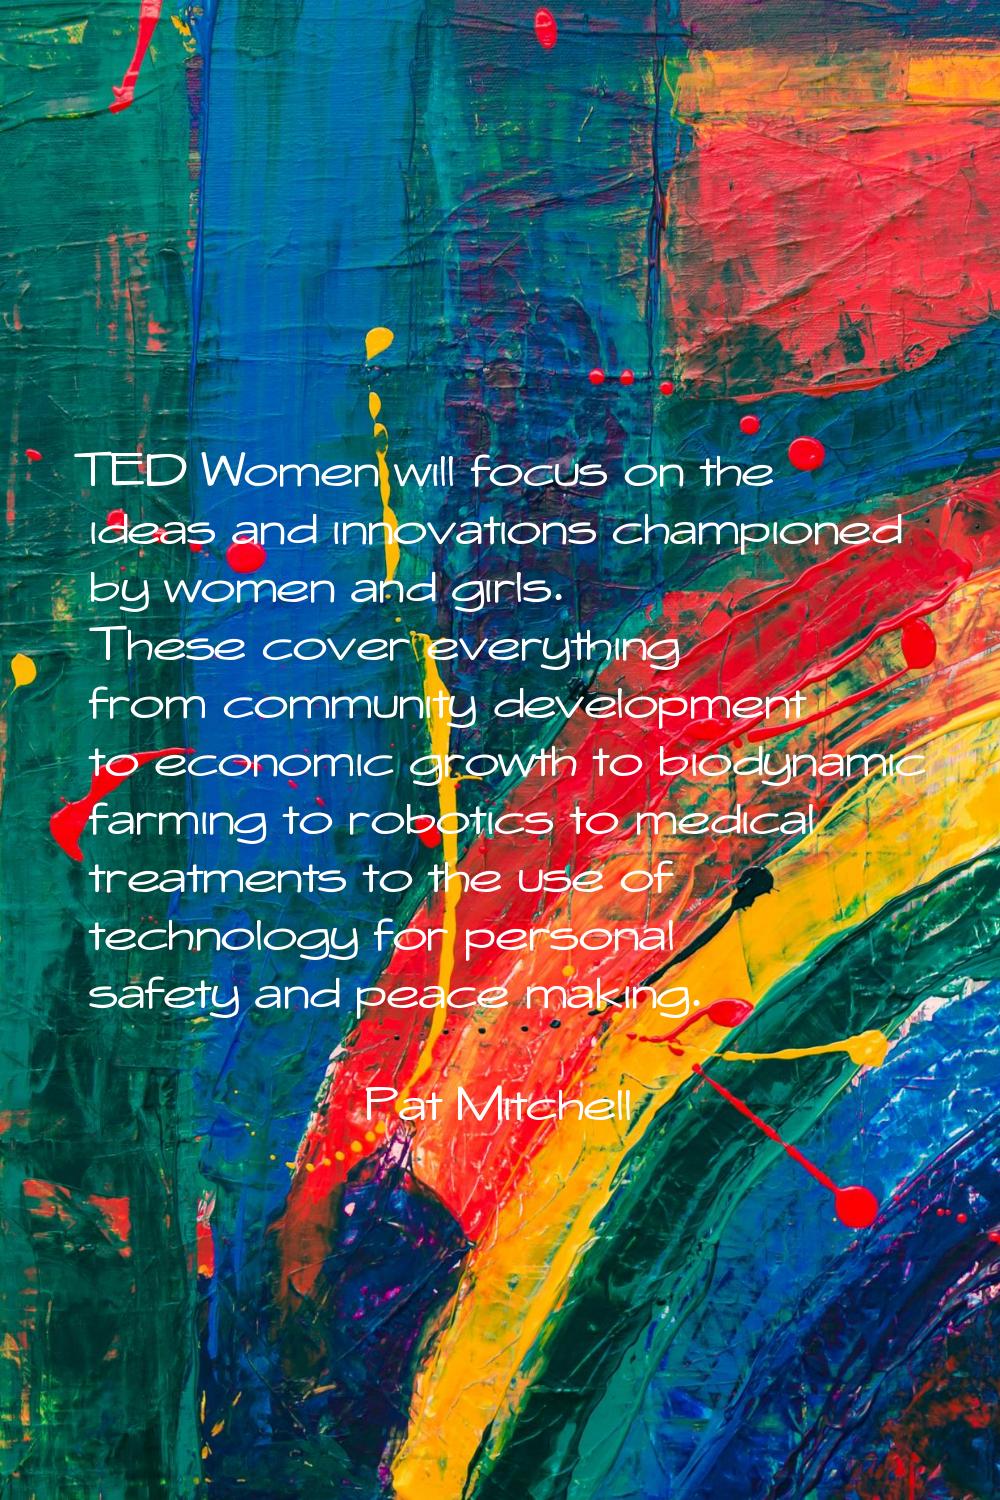 TED Women will focus on the ideas and innovations championed by women and girls. These cover everyt